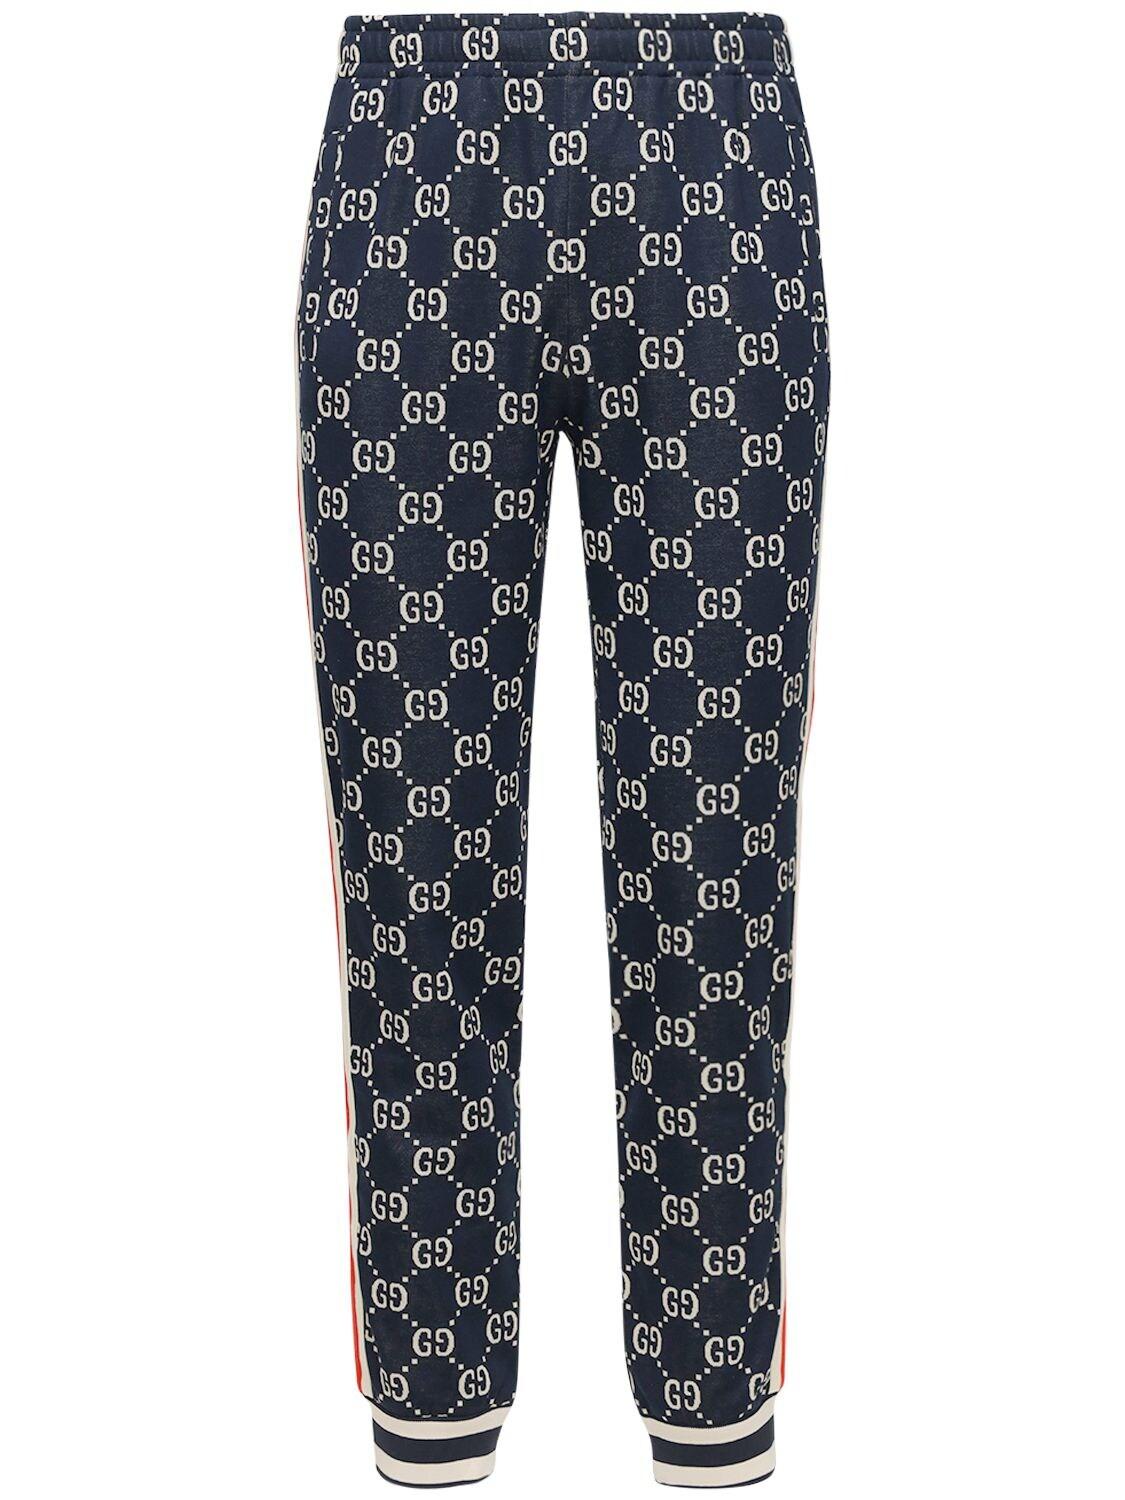 Derved perforere lys pære Gucci Cotton GG Jacquard jogging Pant in Blue for Men - Save 31% - Lyst